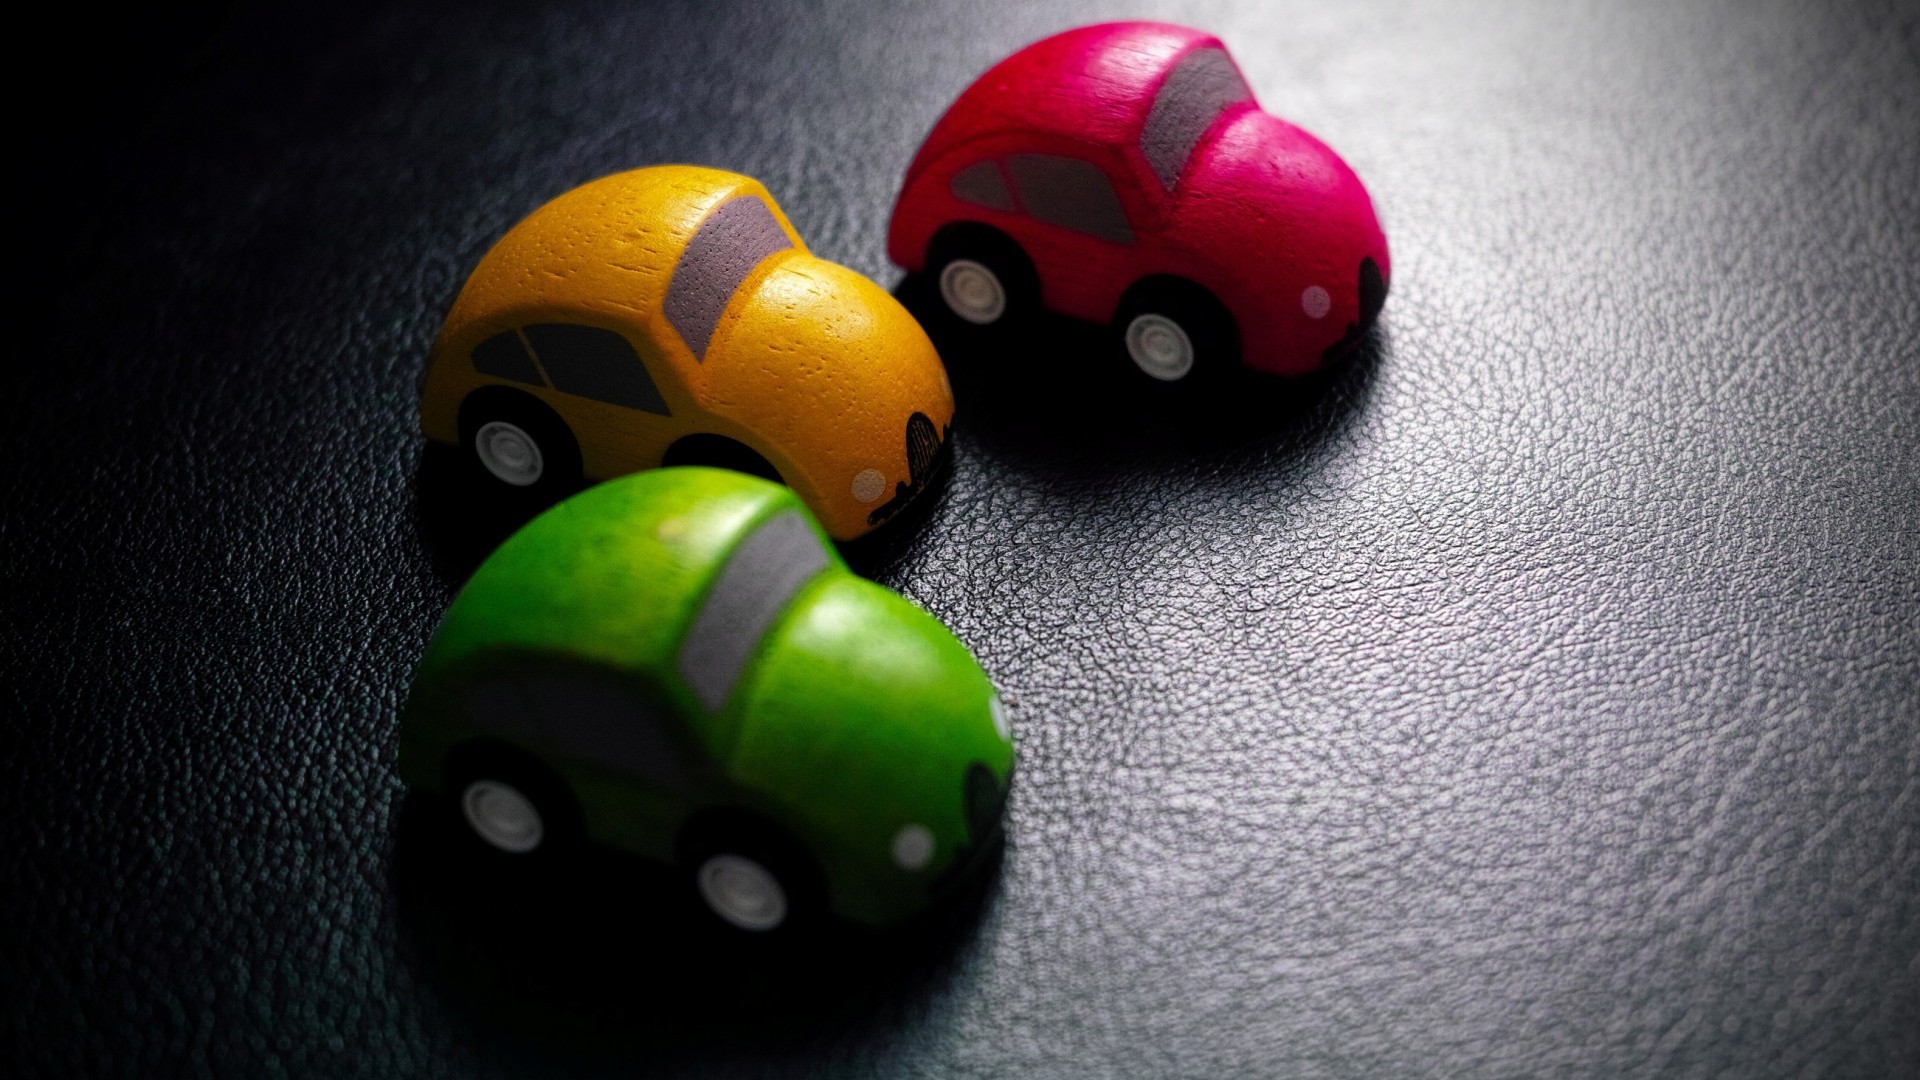 General 1920x1080 toys car red cars yellow cars green cars vehicle